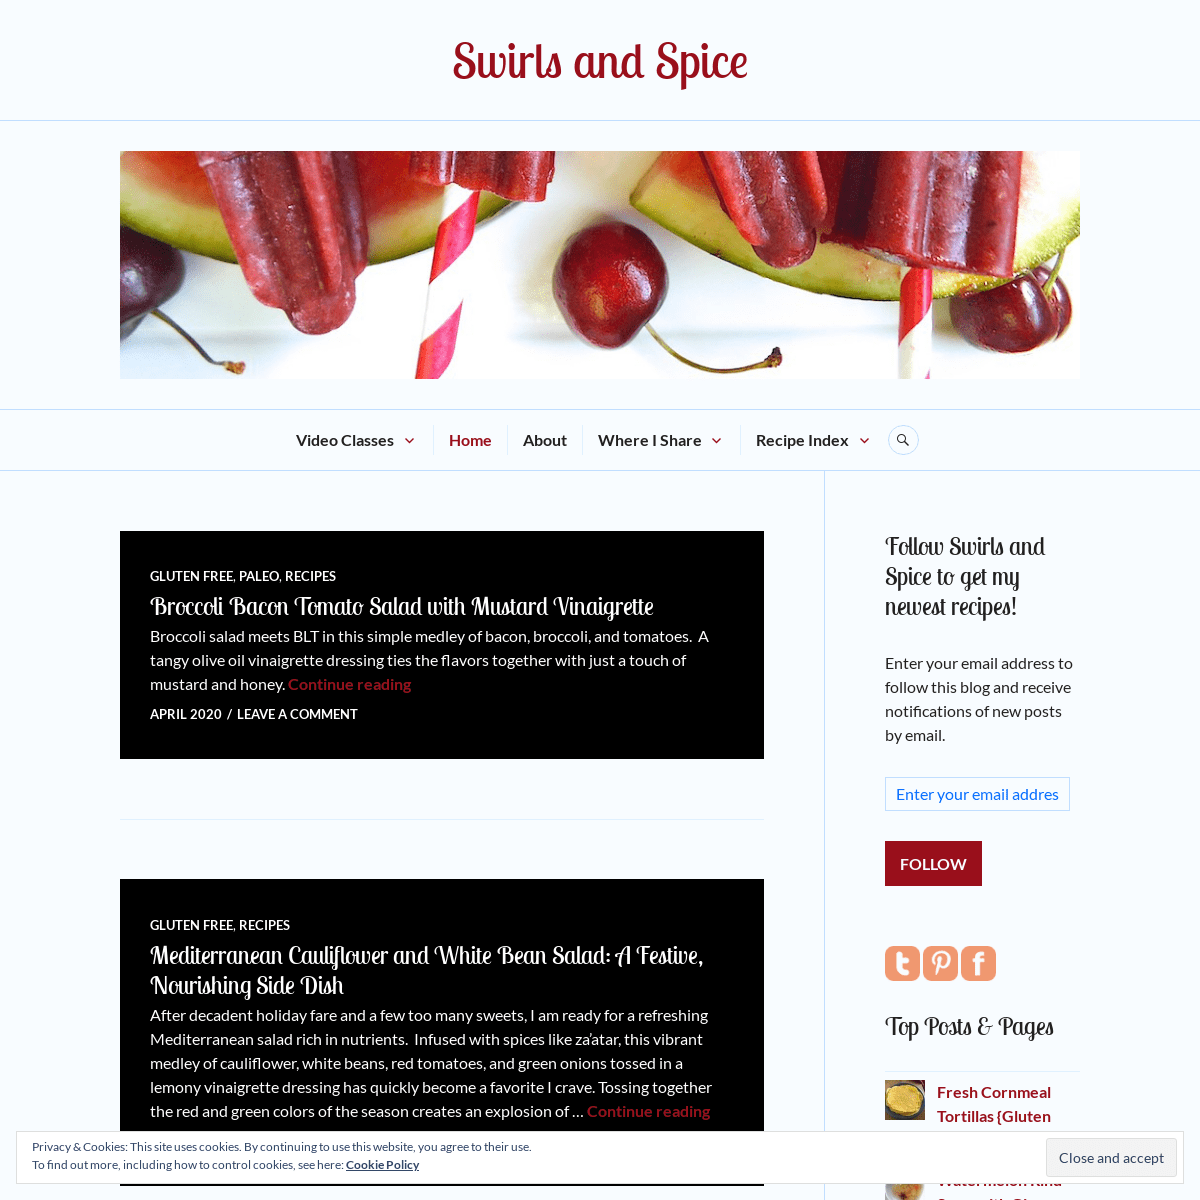 A complete backup of https://swirlsandspice.com